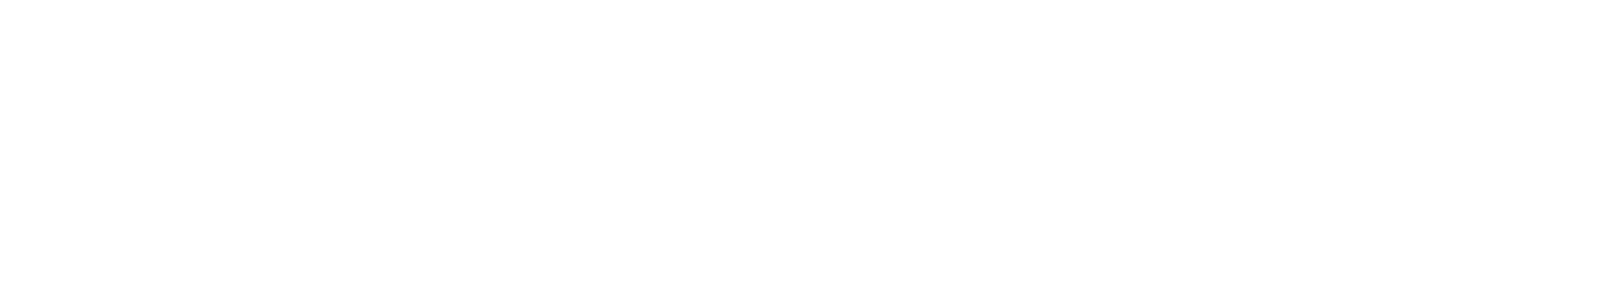 Global Opportunities Fund - DXE Fund